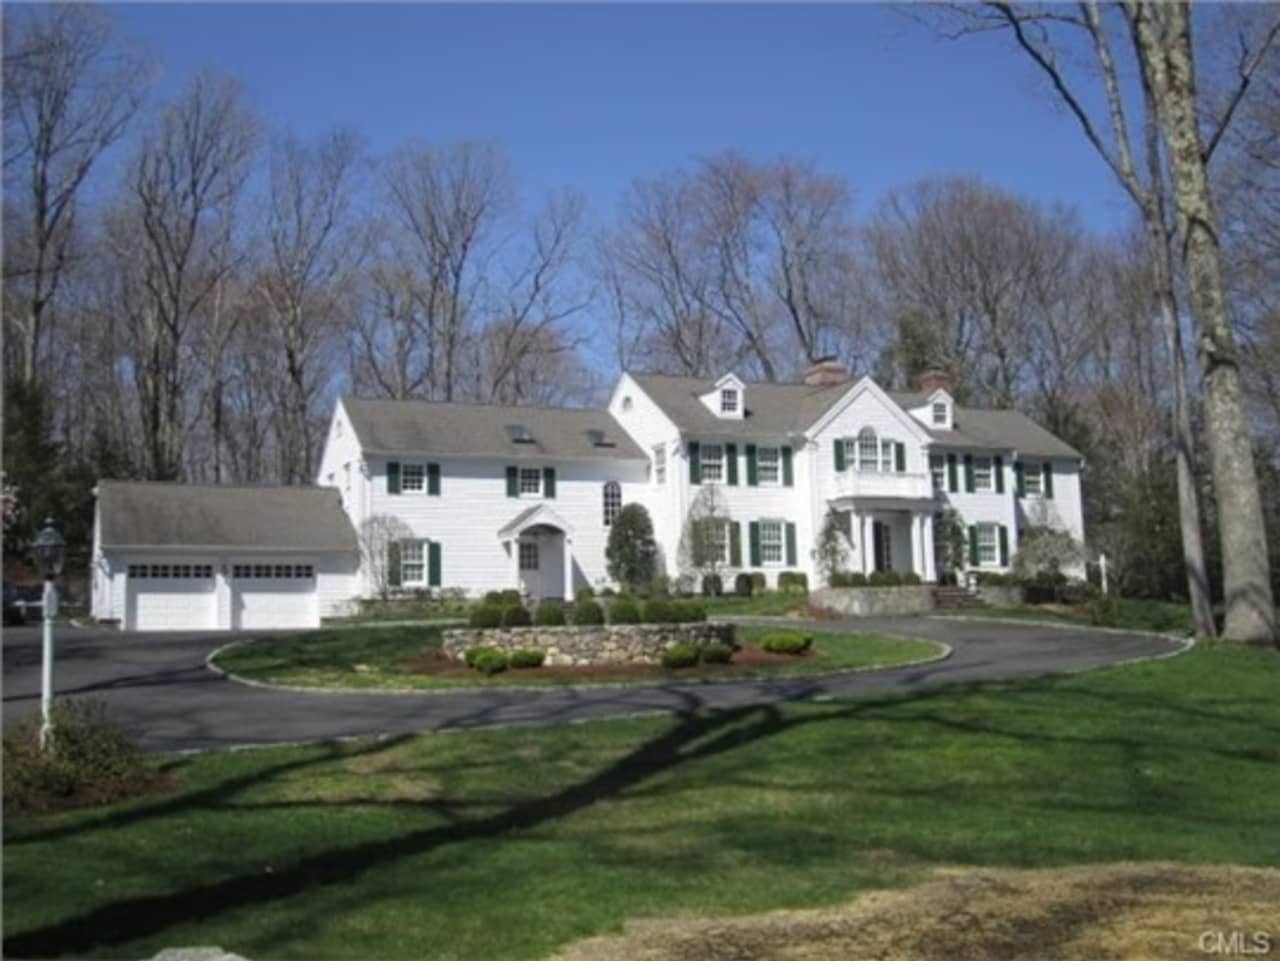 The home at 67 Stonehenge Drive in New Canaan will be open from 1 to 3 p.m. on May 5. 